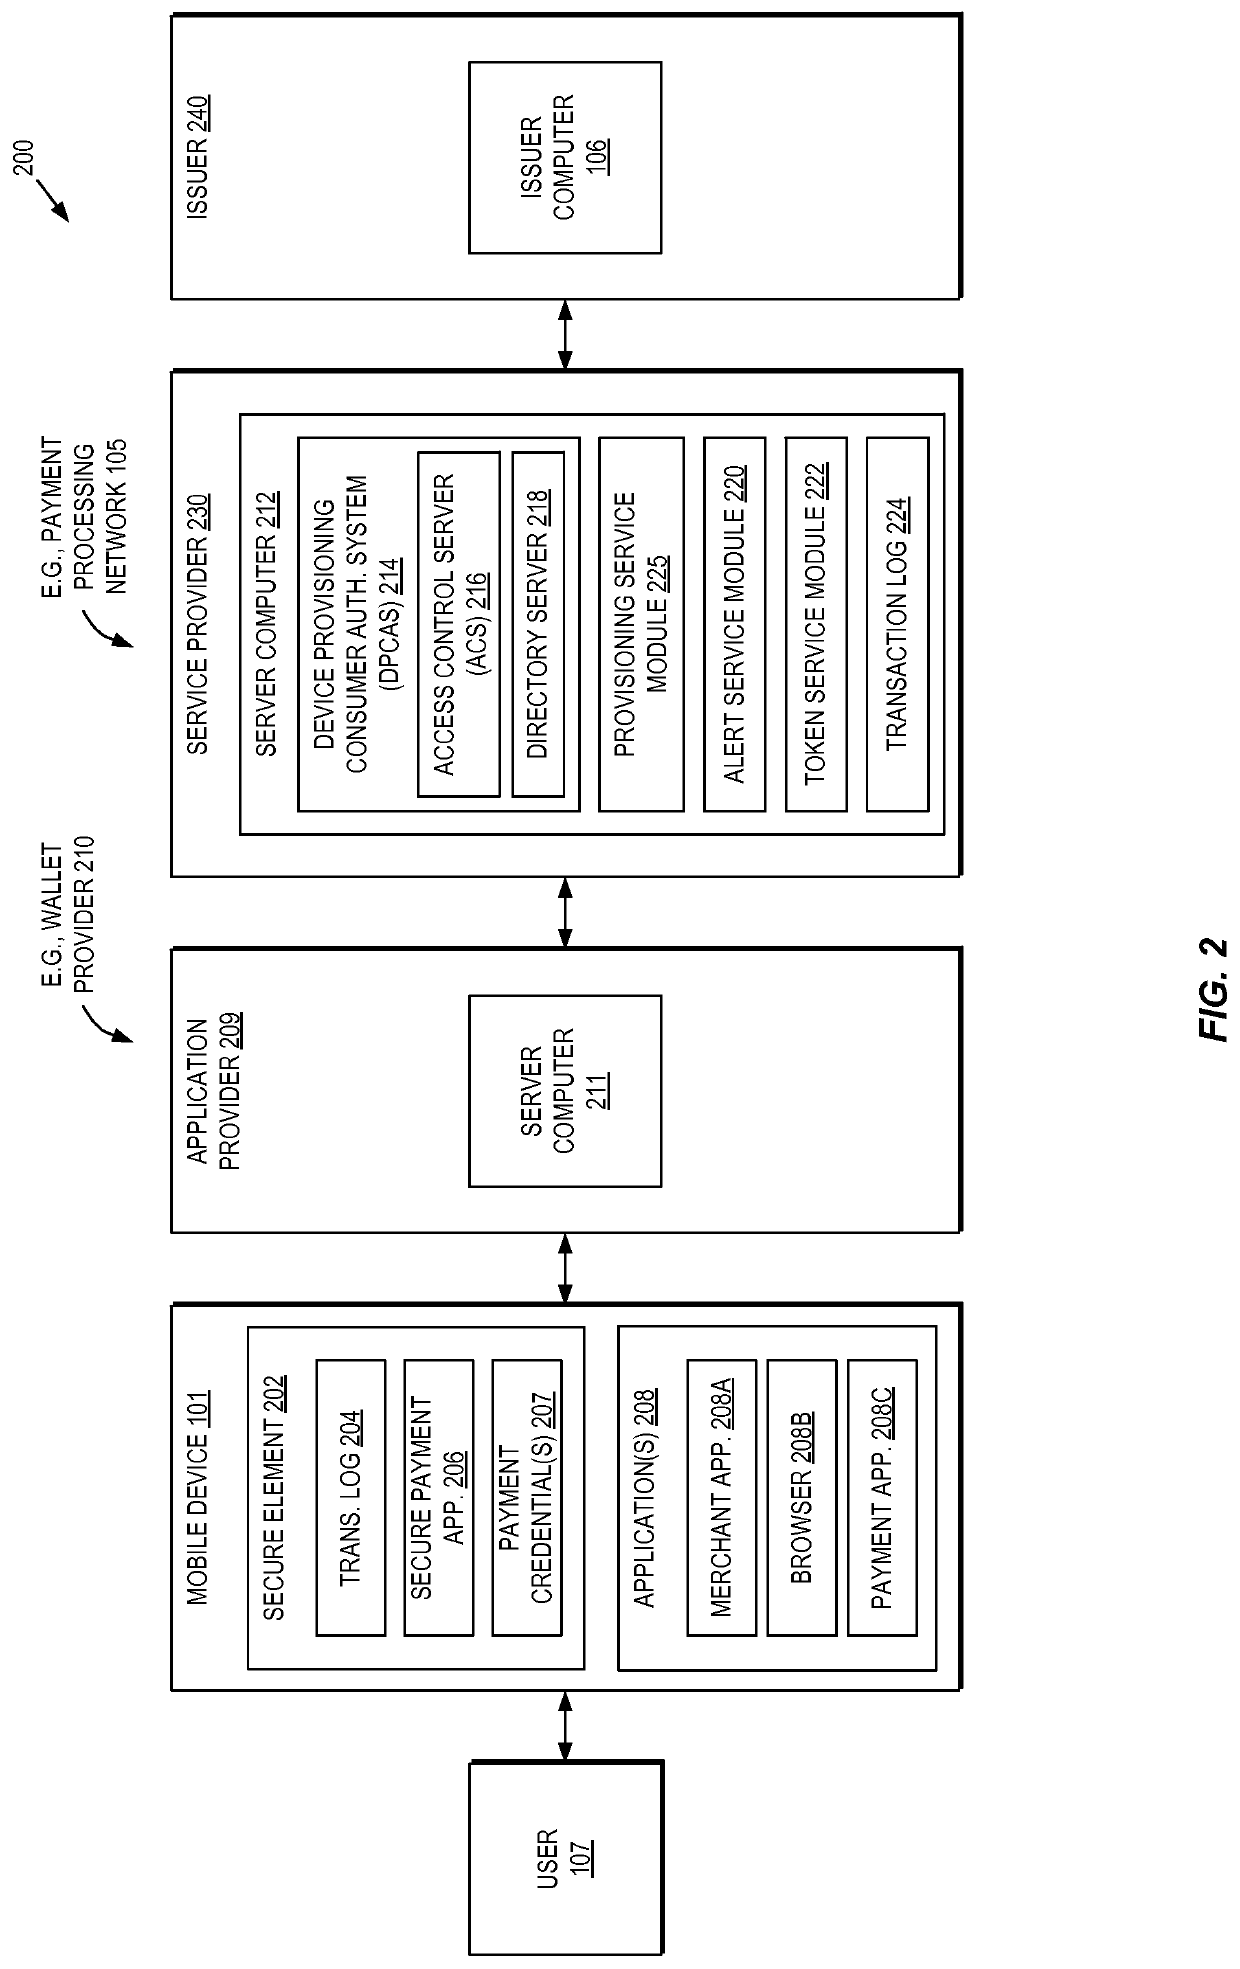 Methods and systems for provisioning mobile devices with payment credentials